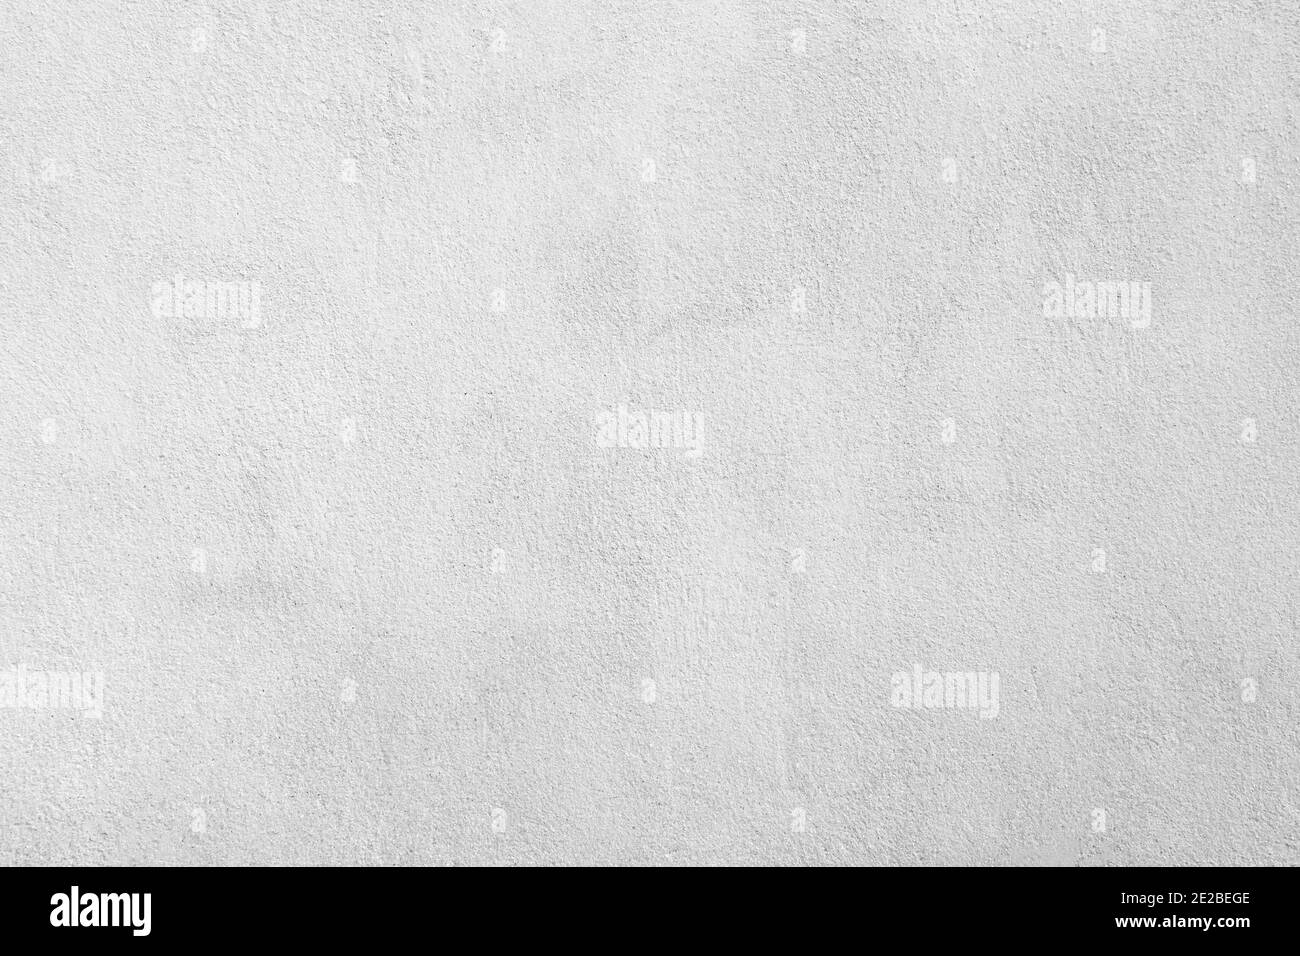 Modern grey paint limestone texture background in white light seam home wall paper. Back flat subway concrete stone table floor concept surreal granit Stock Photo